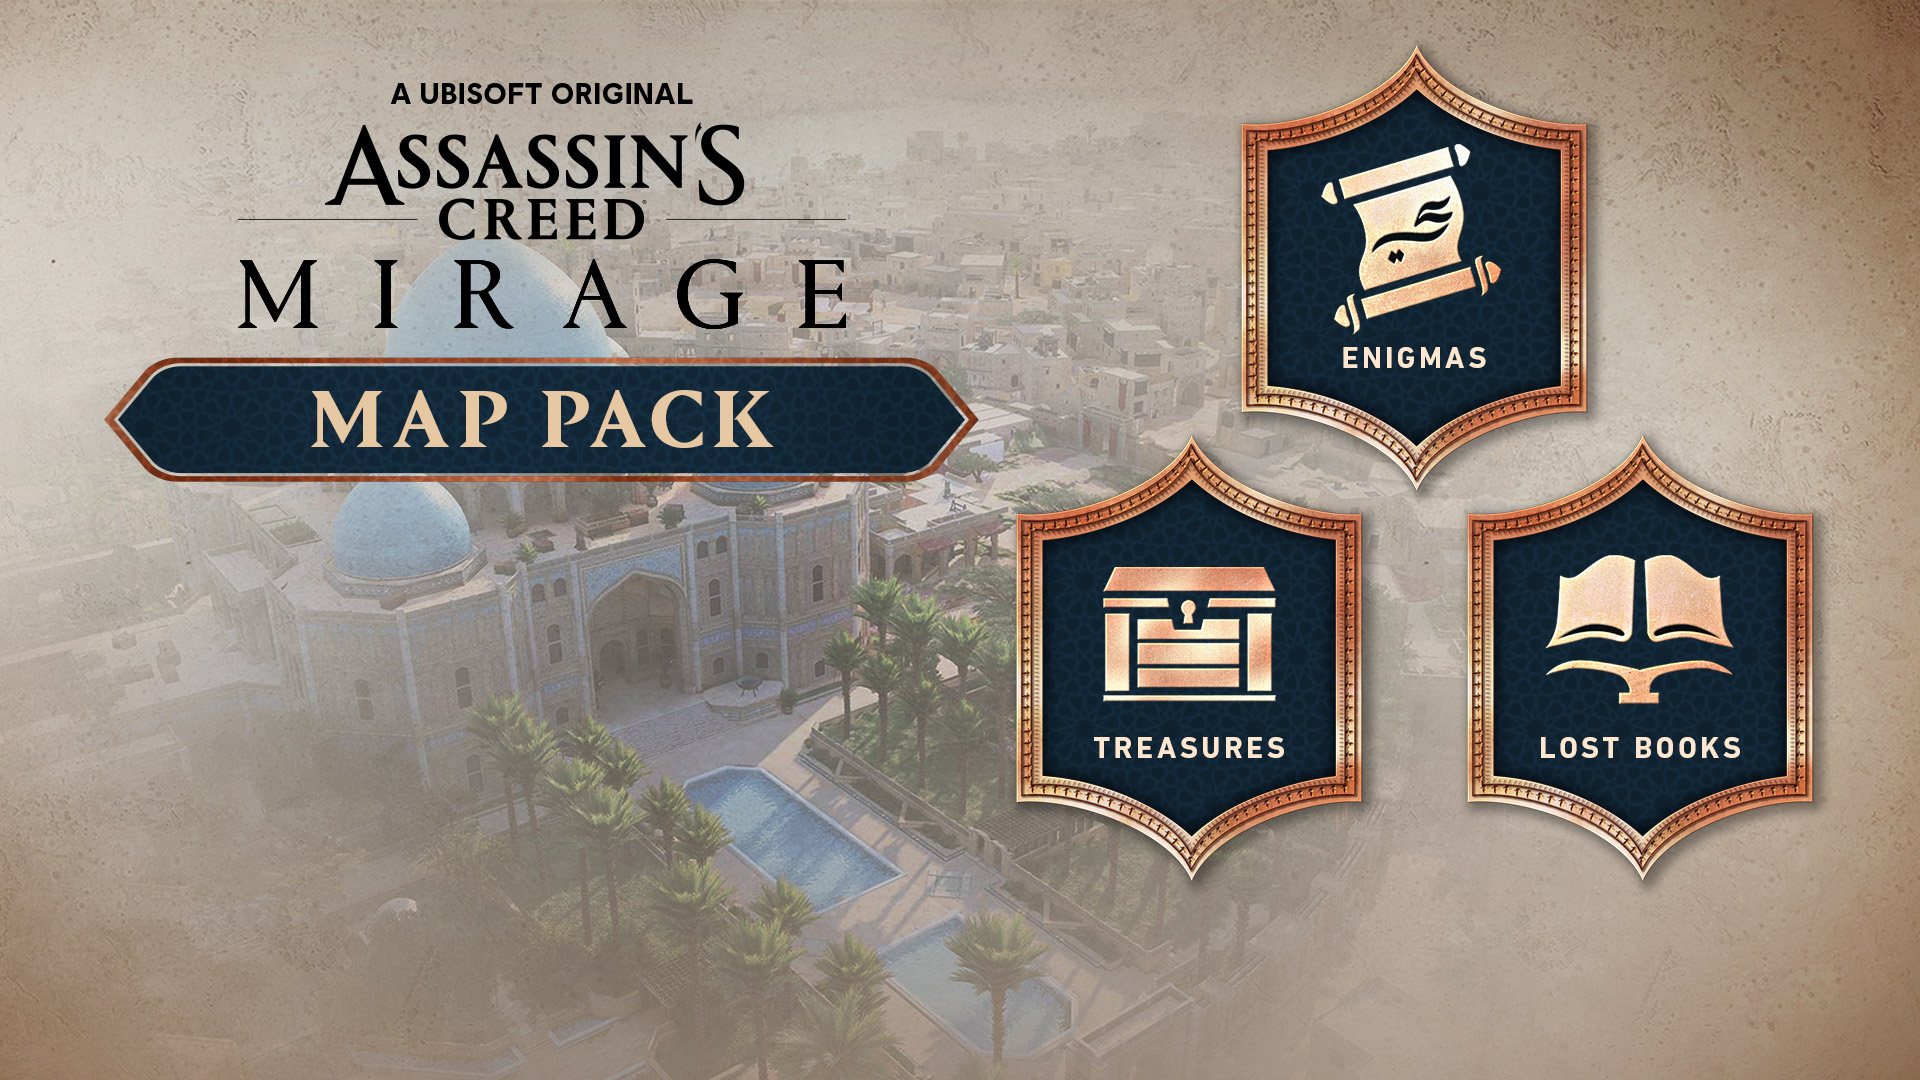 [$ 7.9] Assassin's Creed Mirage - Map Pack DLC AR XBOX One / Xbox Series X|S CD Key